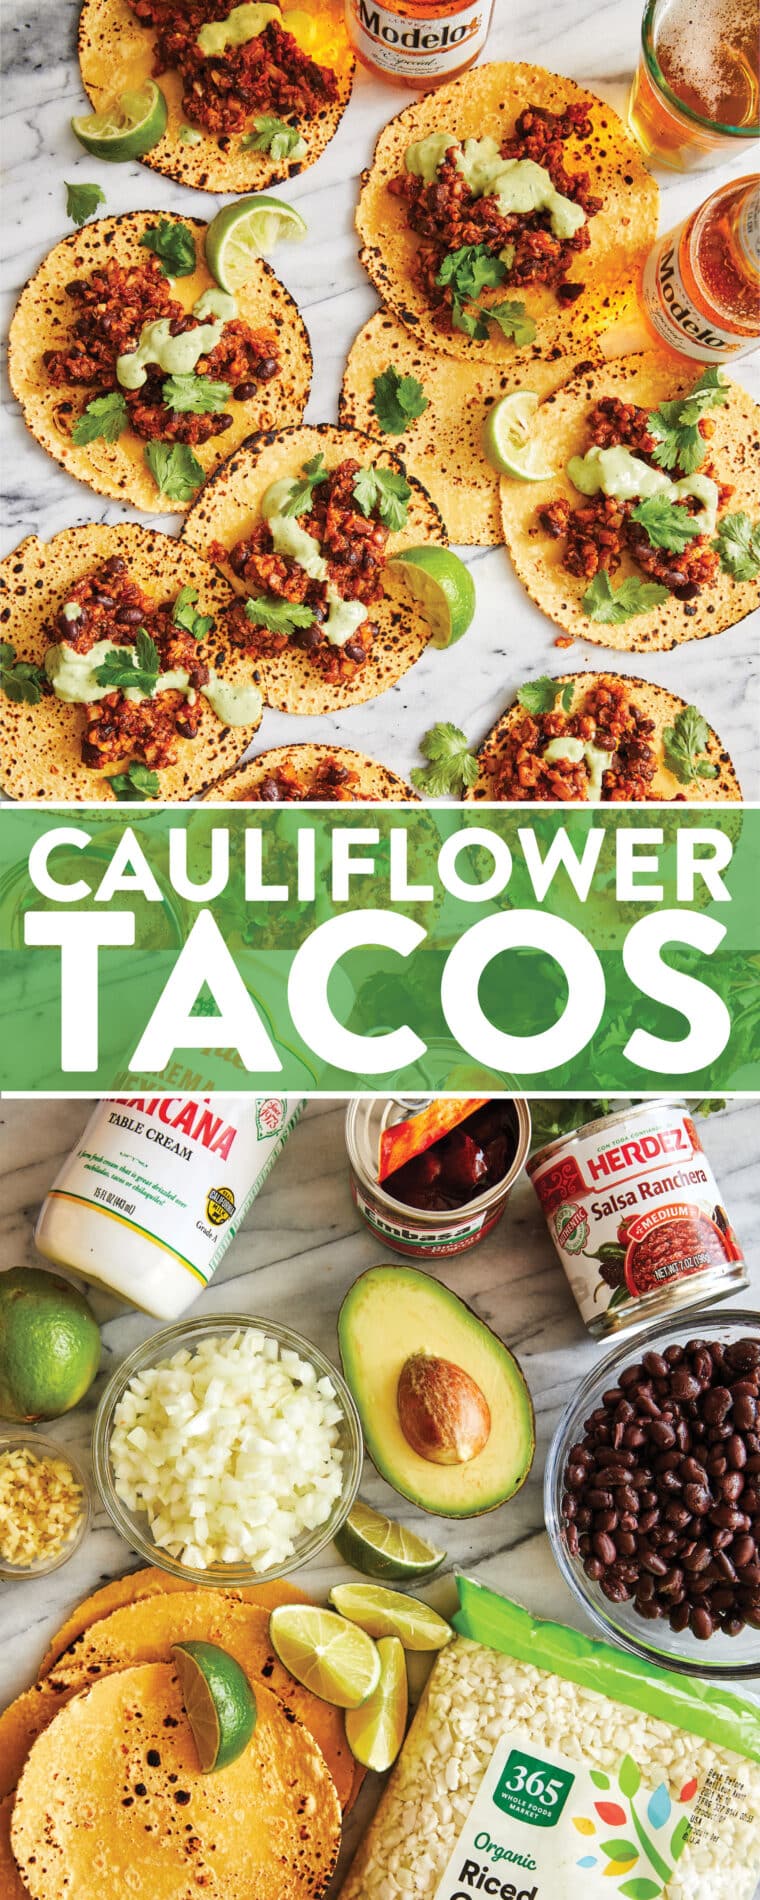 Cauliflower Tacos - SO PERFECT FOR TACO NIGHT! Completely vegetarian and so easy to make, topped with the best avocado crema sauce. SO GOOD.